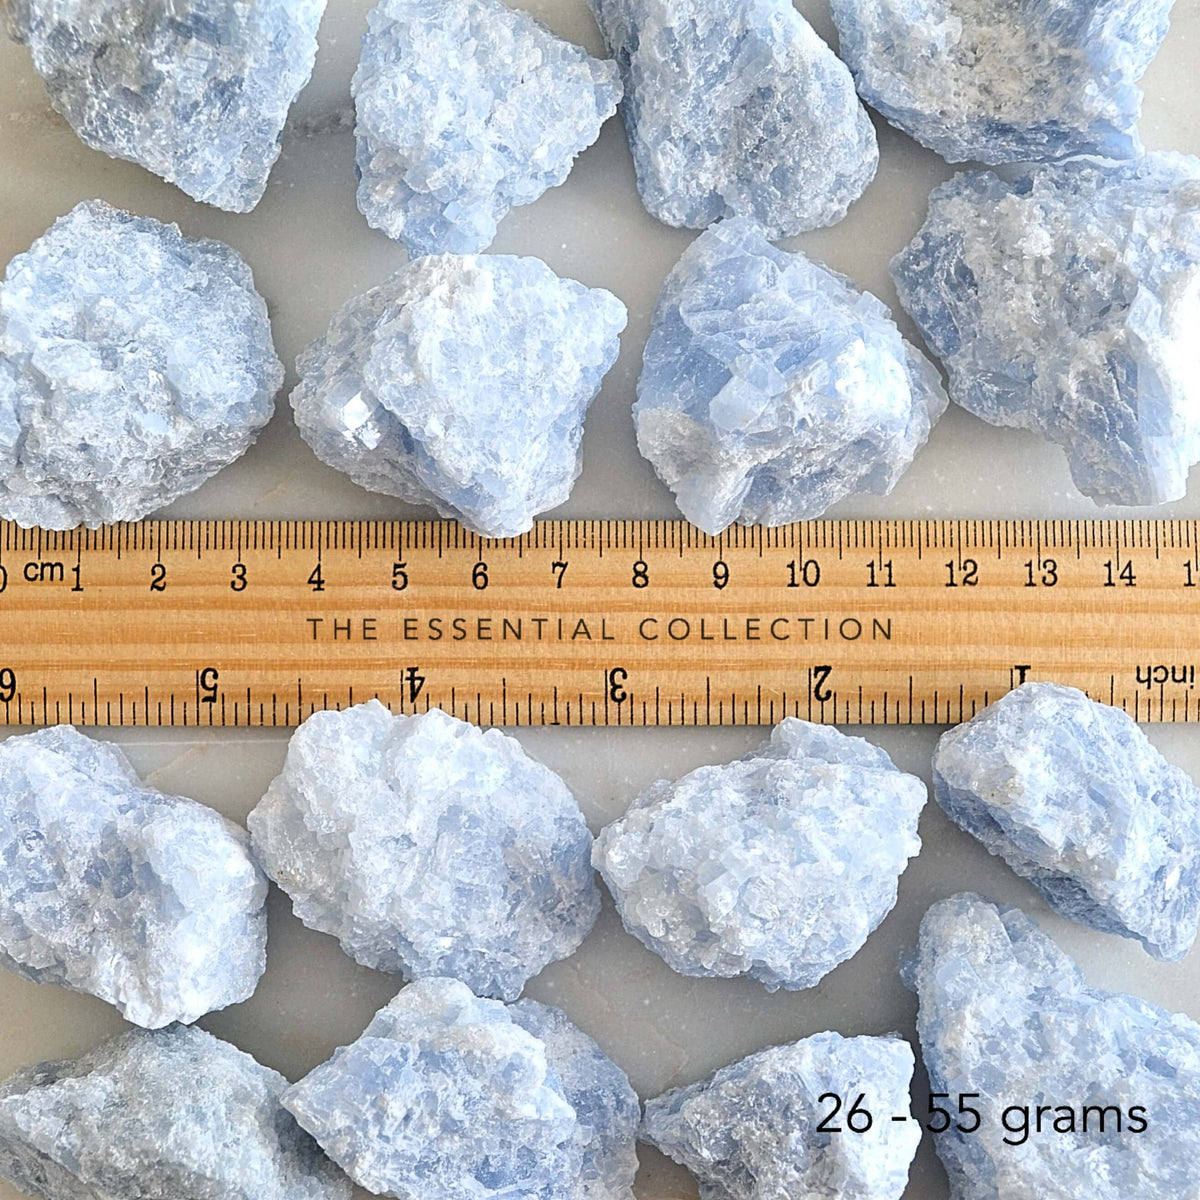 large rough raw blue calcite with ruler showing size